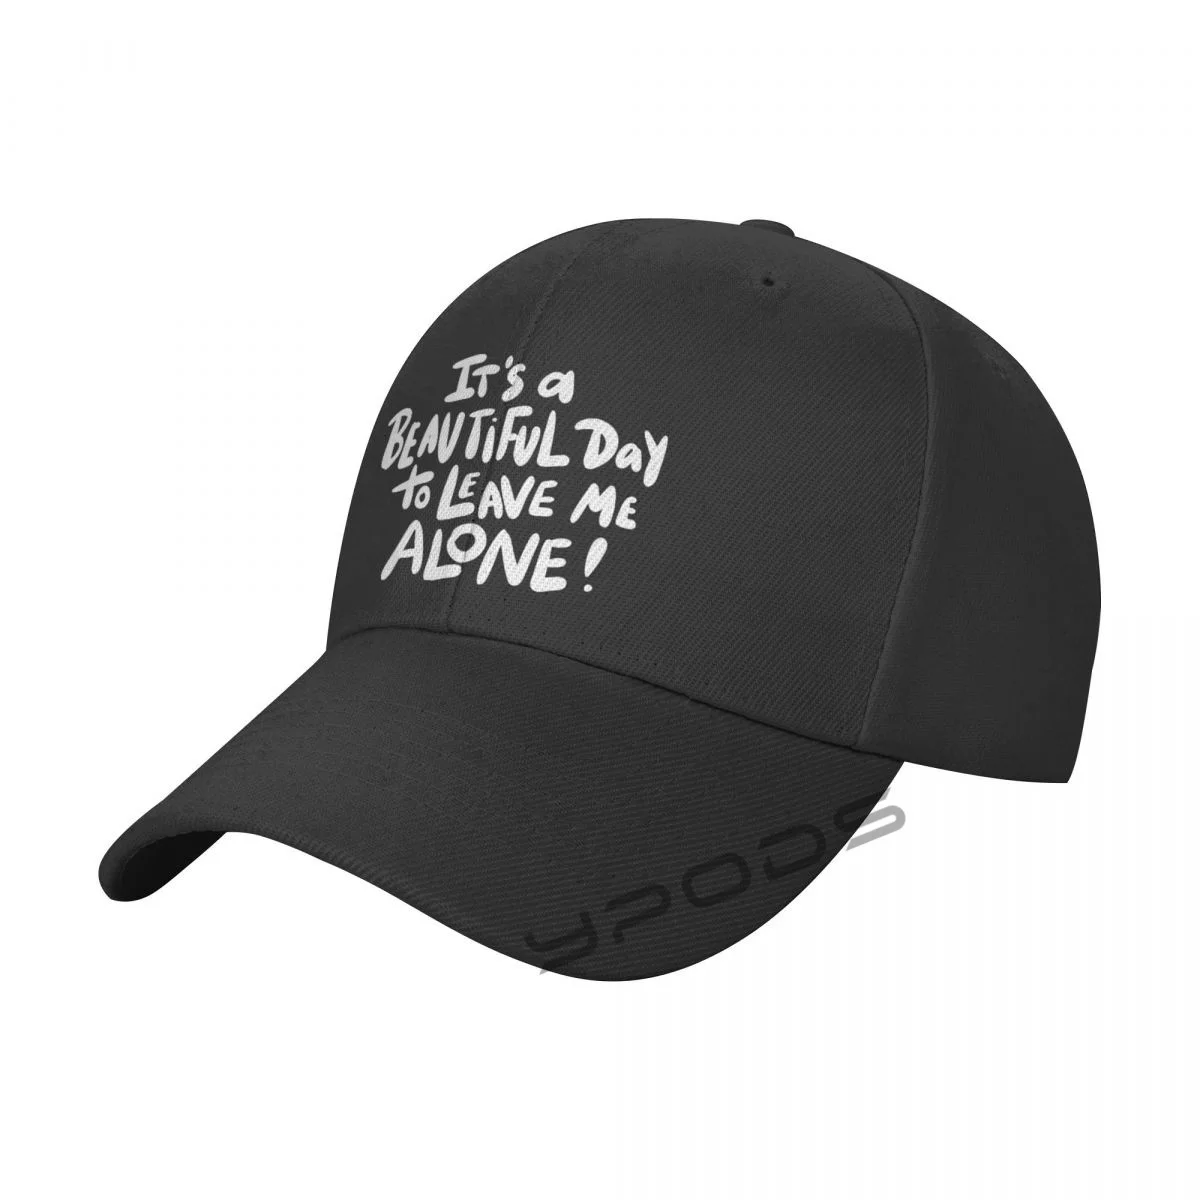 

printing Baseball Cap It's A Beautiful Day To Leave Me Alone 2 Adorable Sun Caps Fishing Hat Unisex-Teens Snapback Flat Bill